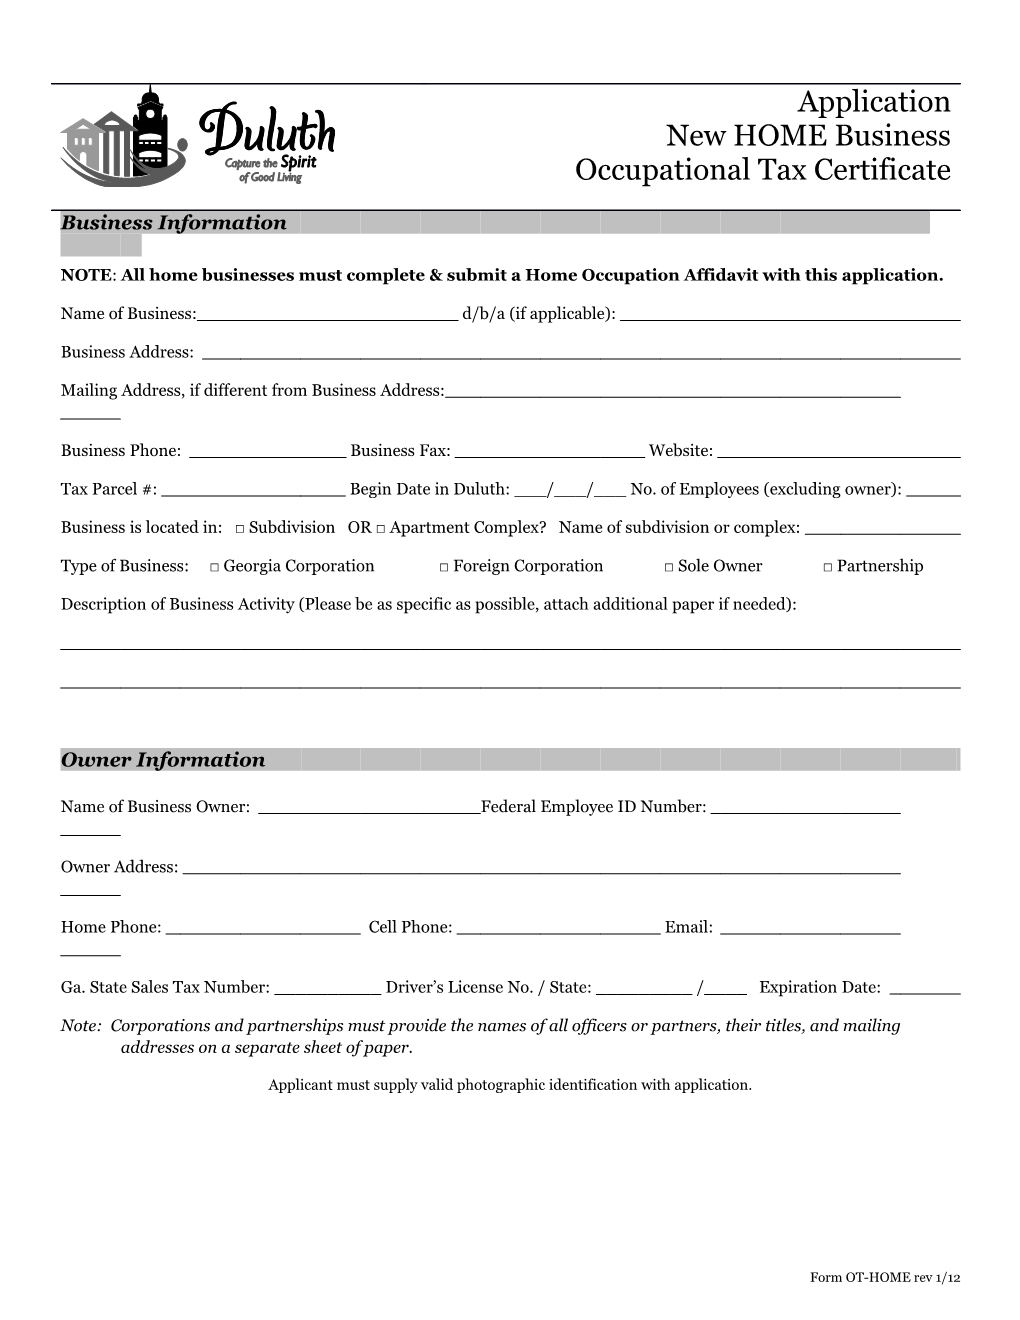 NOTE:All Home Businesses Must Complete & Submit a Home Occupation Affidavit with This